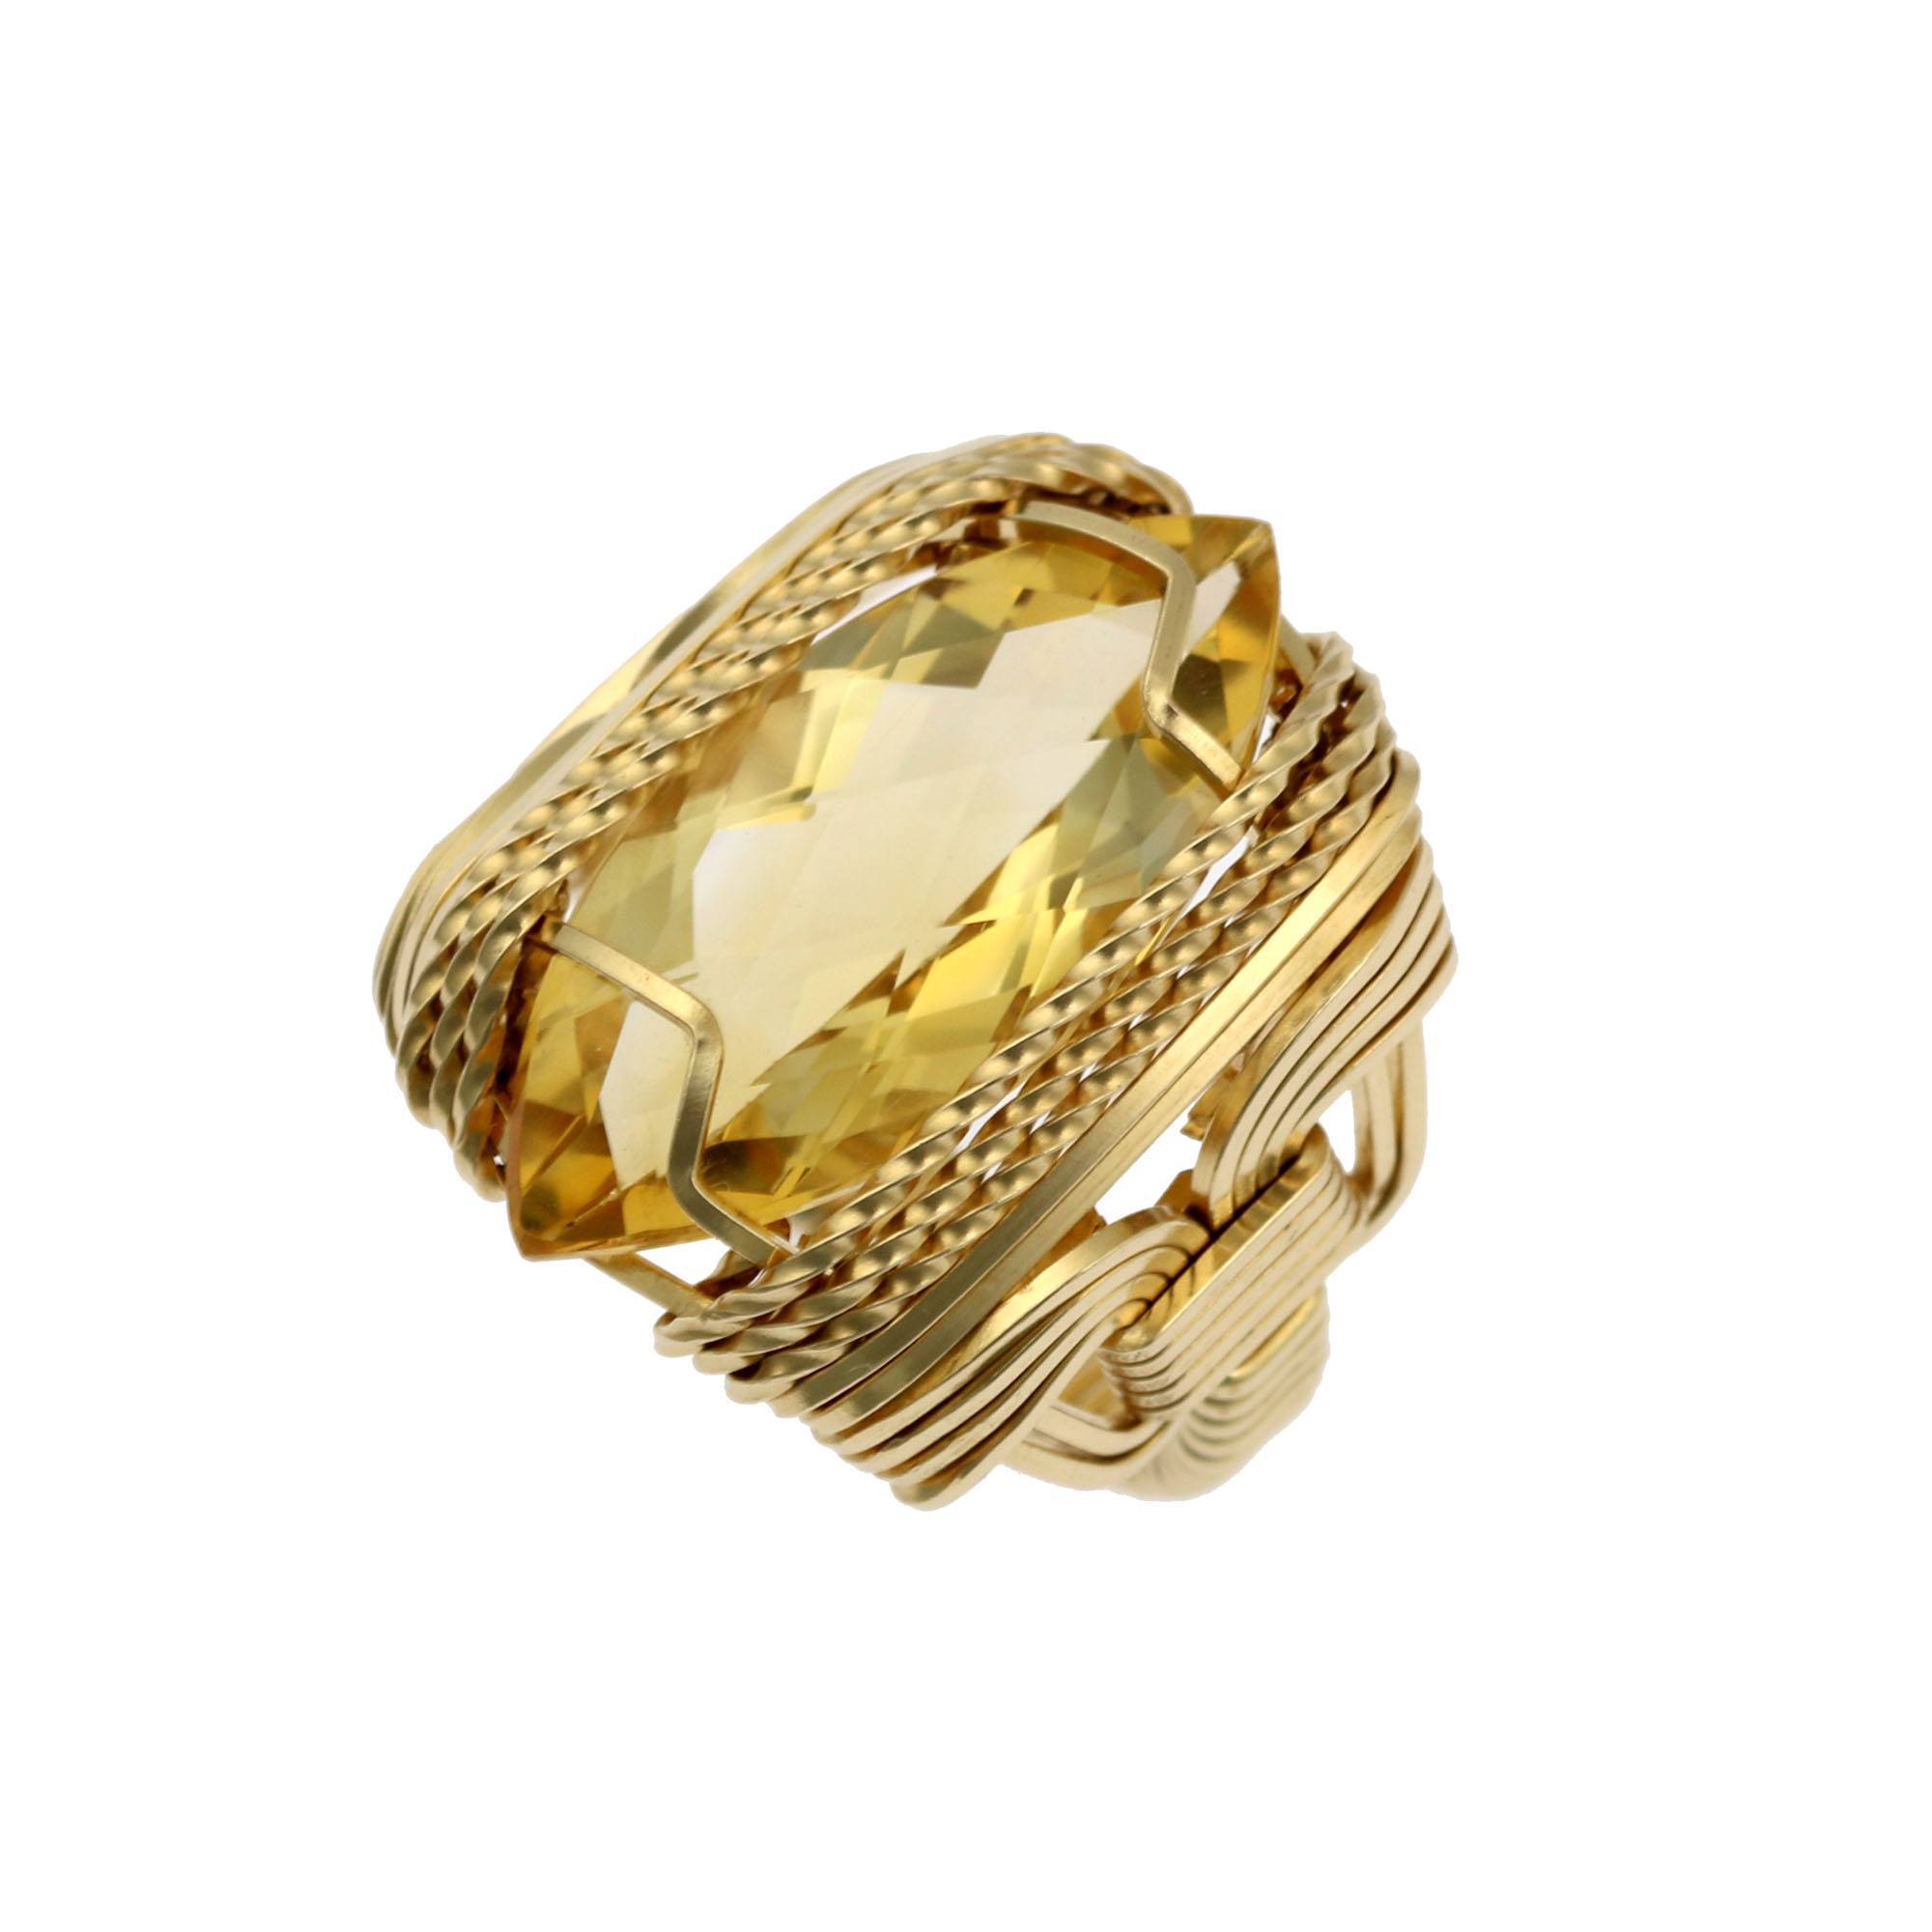 Detail View of Citrine 14K Gold-filled Cocktail Ring